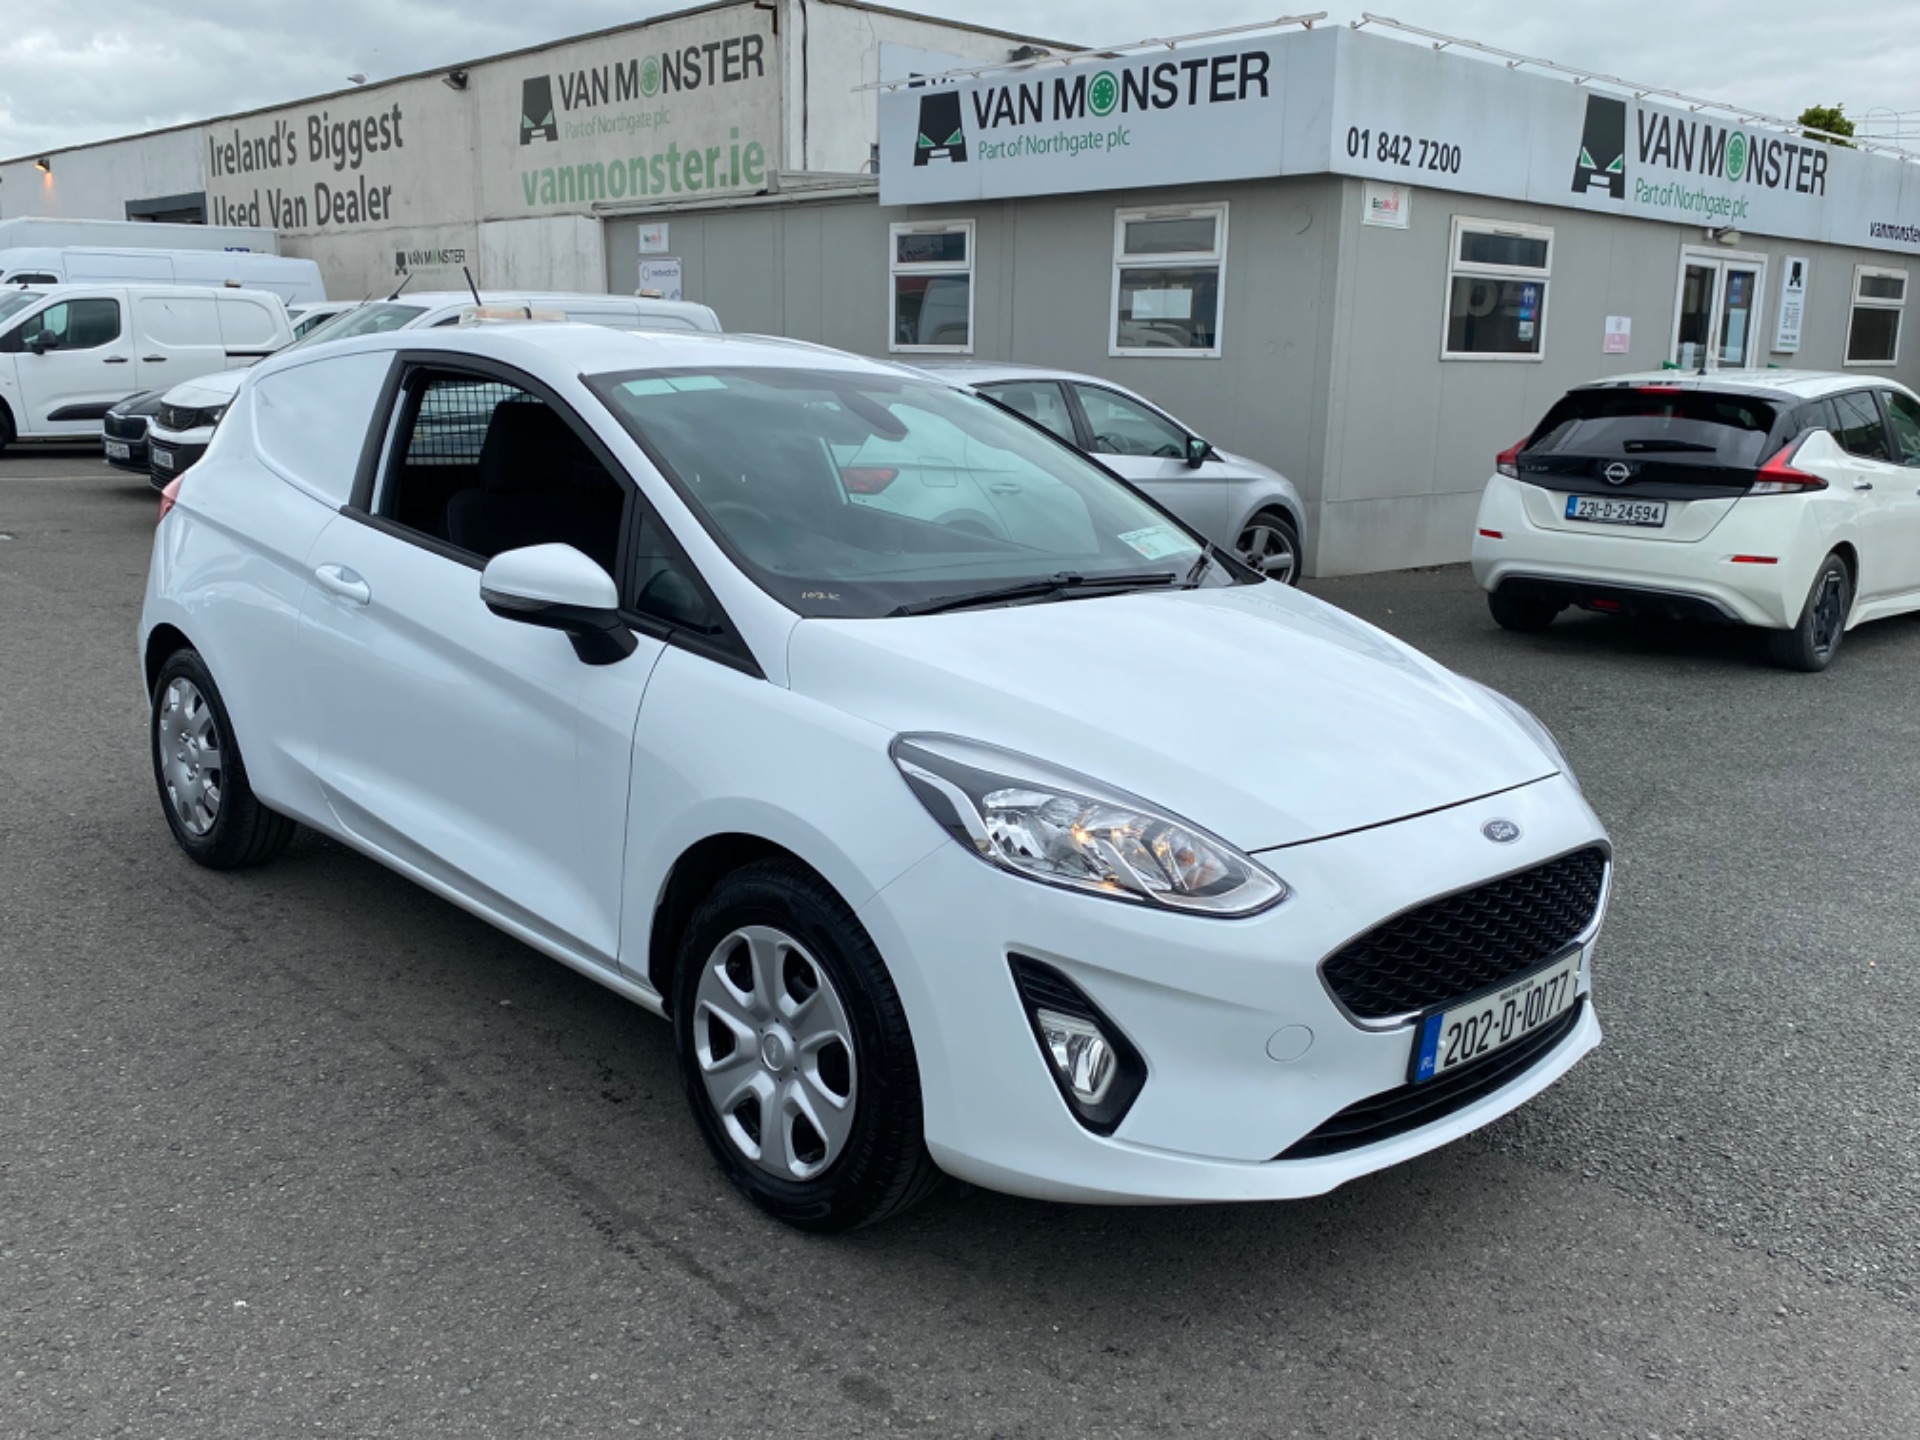 2020 Ford Fiesta Trend 1.5TD 85PS M6 3DR 2DR (202D10177)